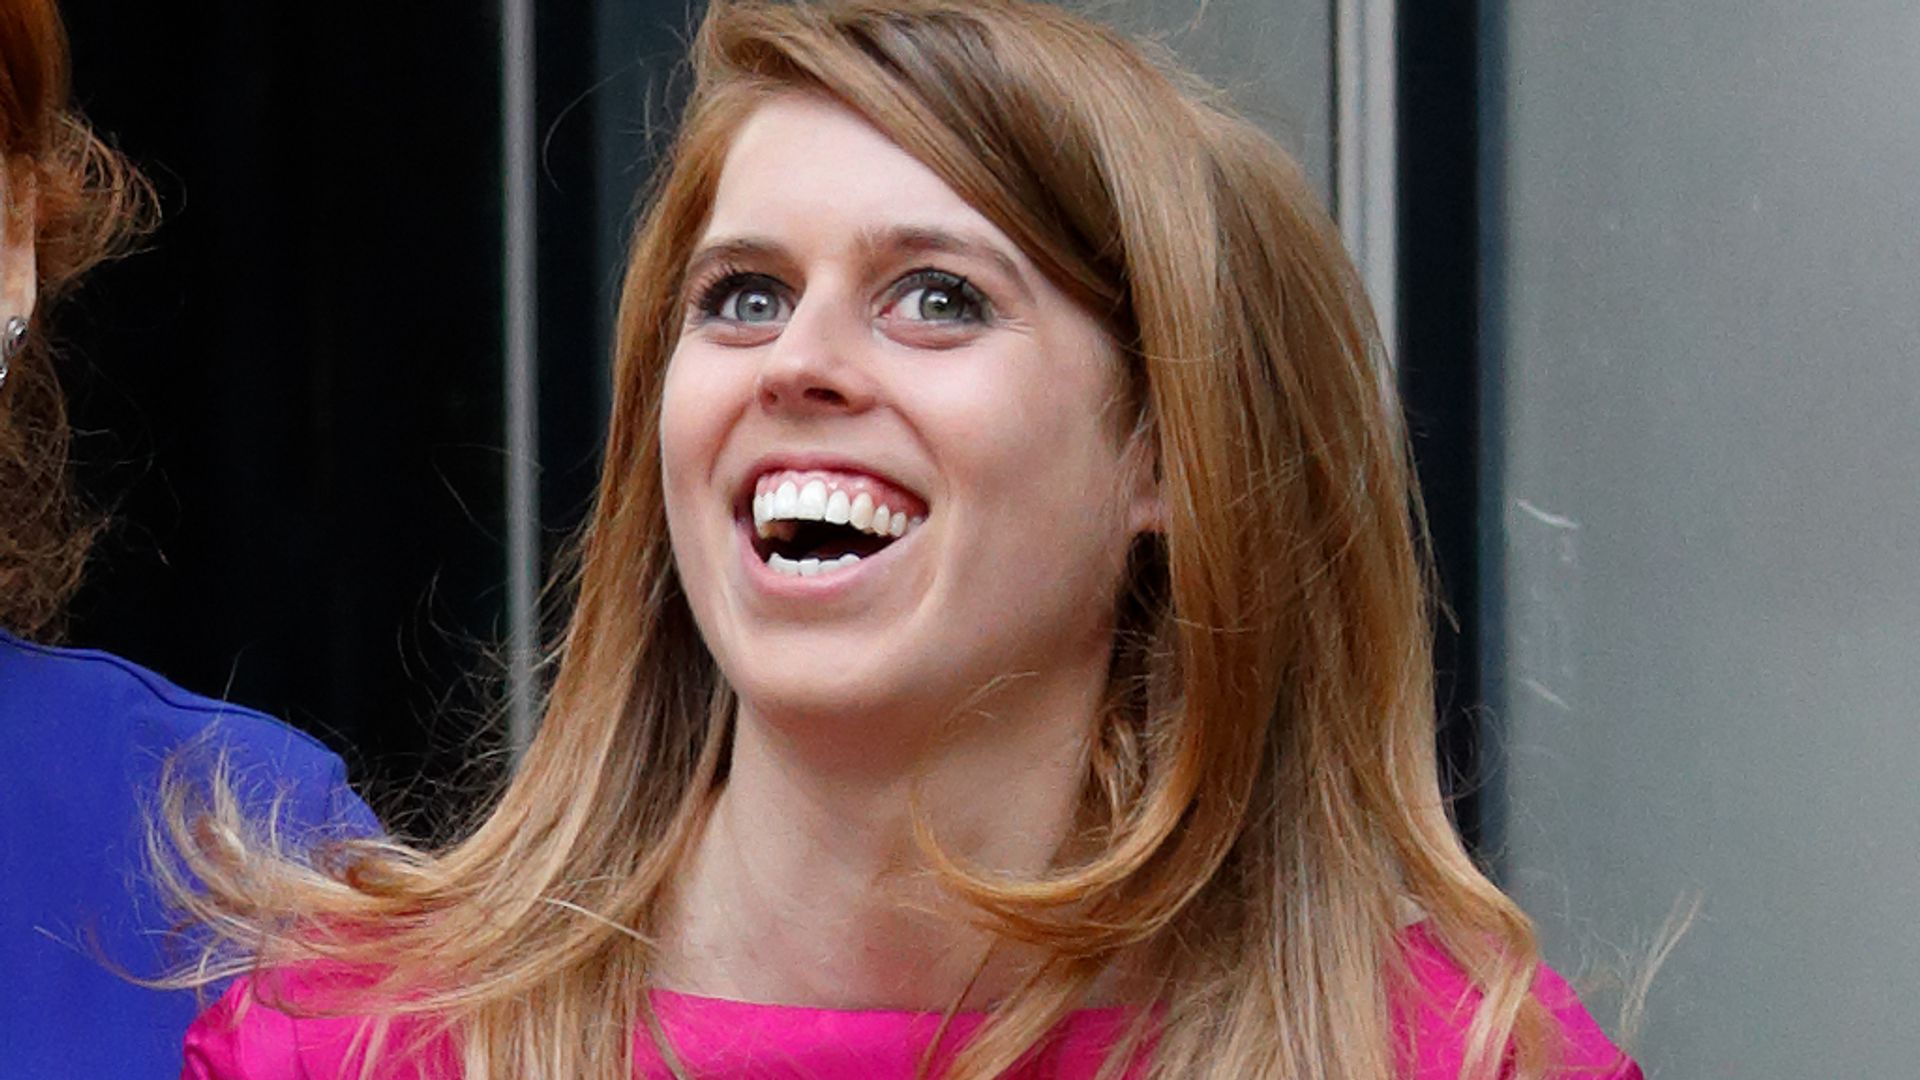 Princess Beatrice laughing in a pink dress